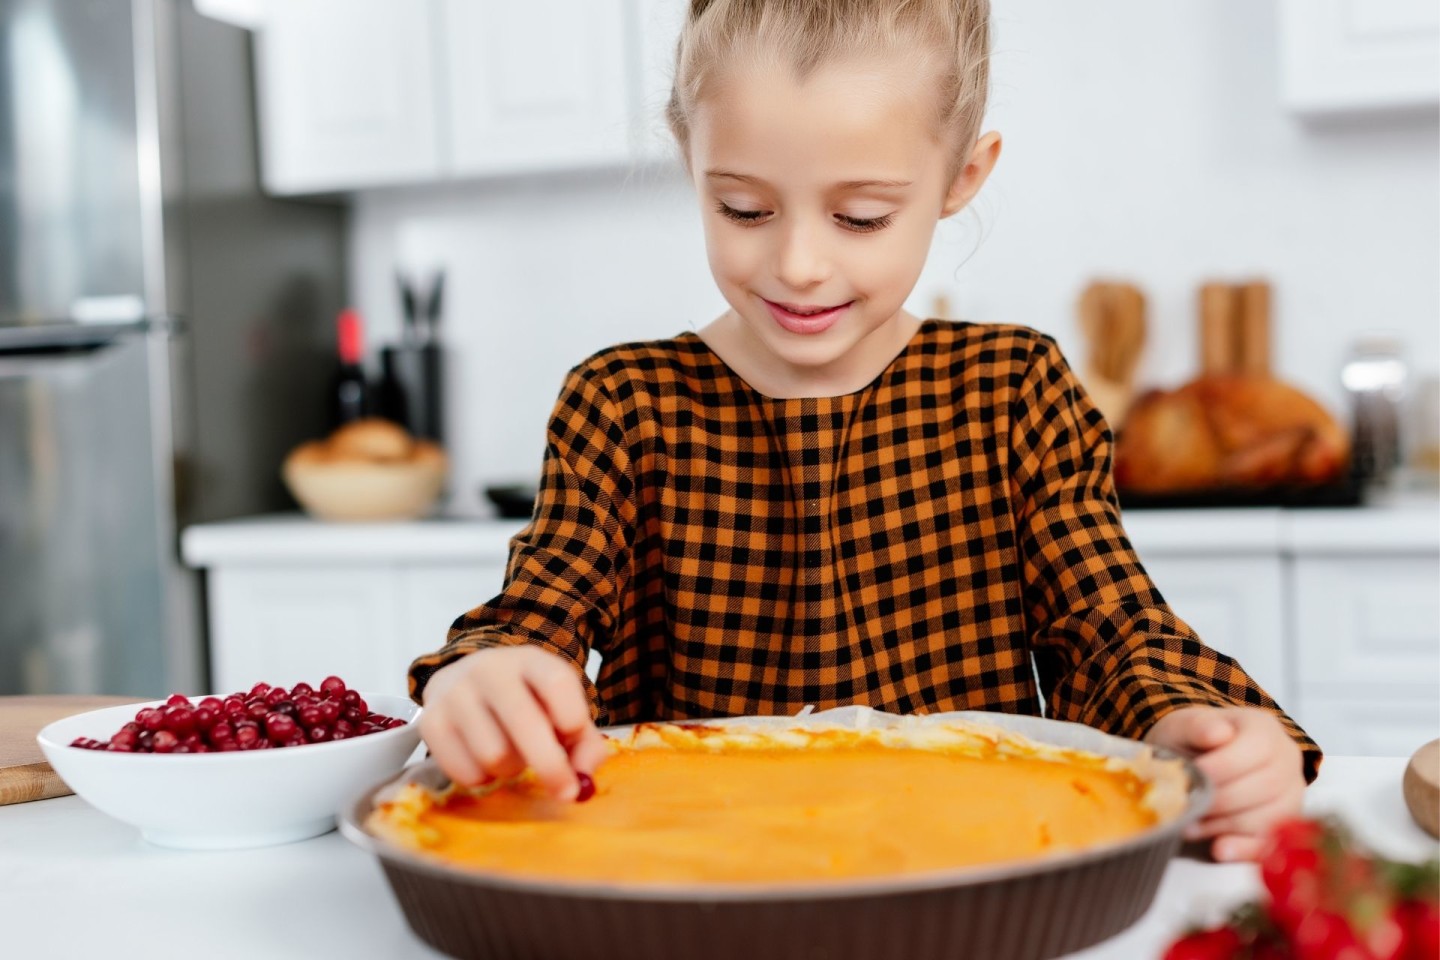 How to serve pumpkin pie to babies and toddlers